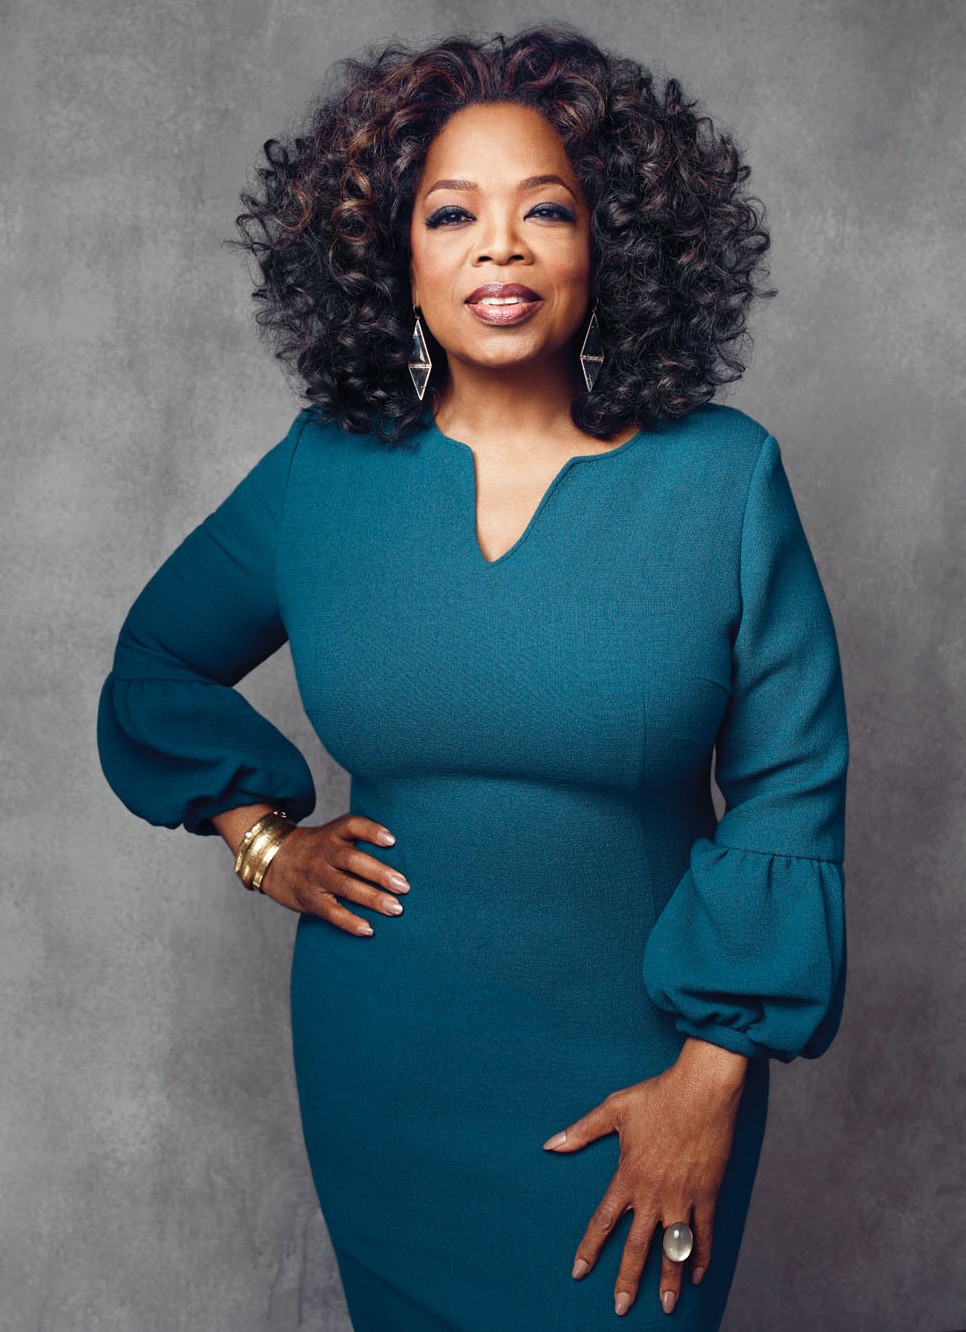 Oprah Winfrey (host) Wiki, biography, net worth, salary, spouse, height, weight, married, husband, age, facts